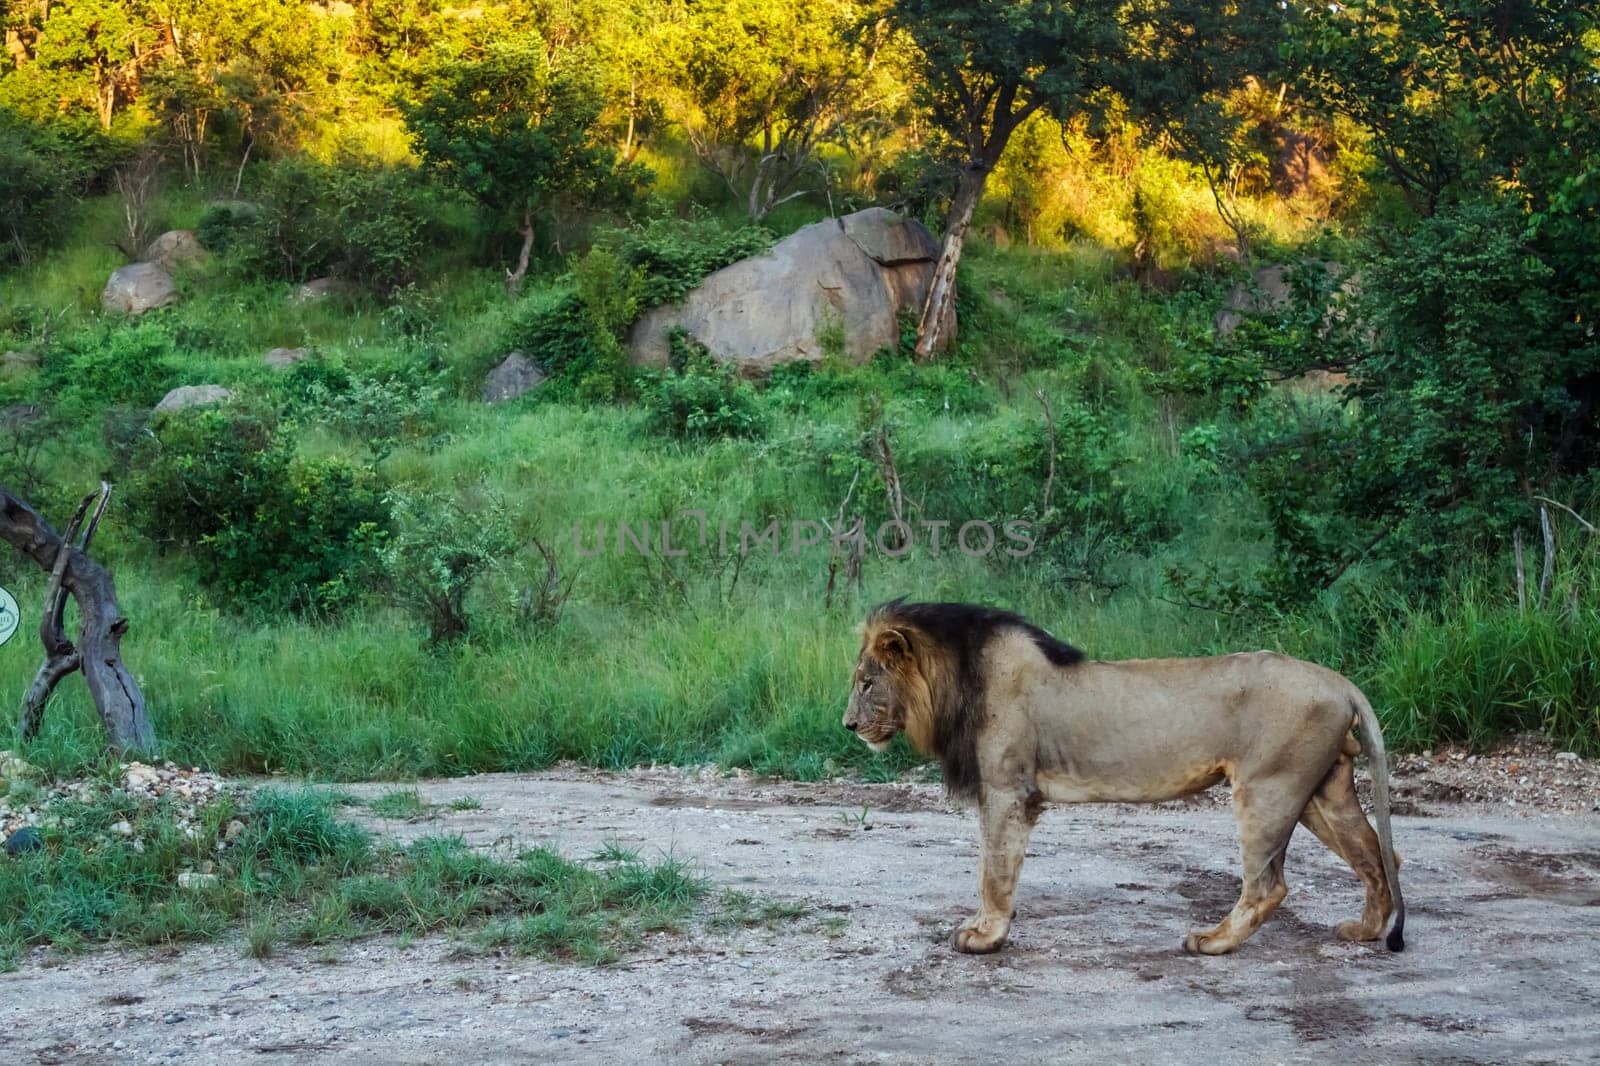 African lion male standing on safari road in Kruger National park, South Africa ; Specie Panthera leo family of Felidae